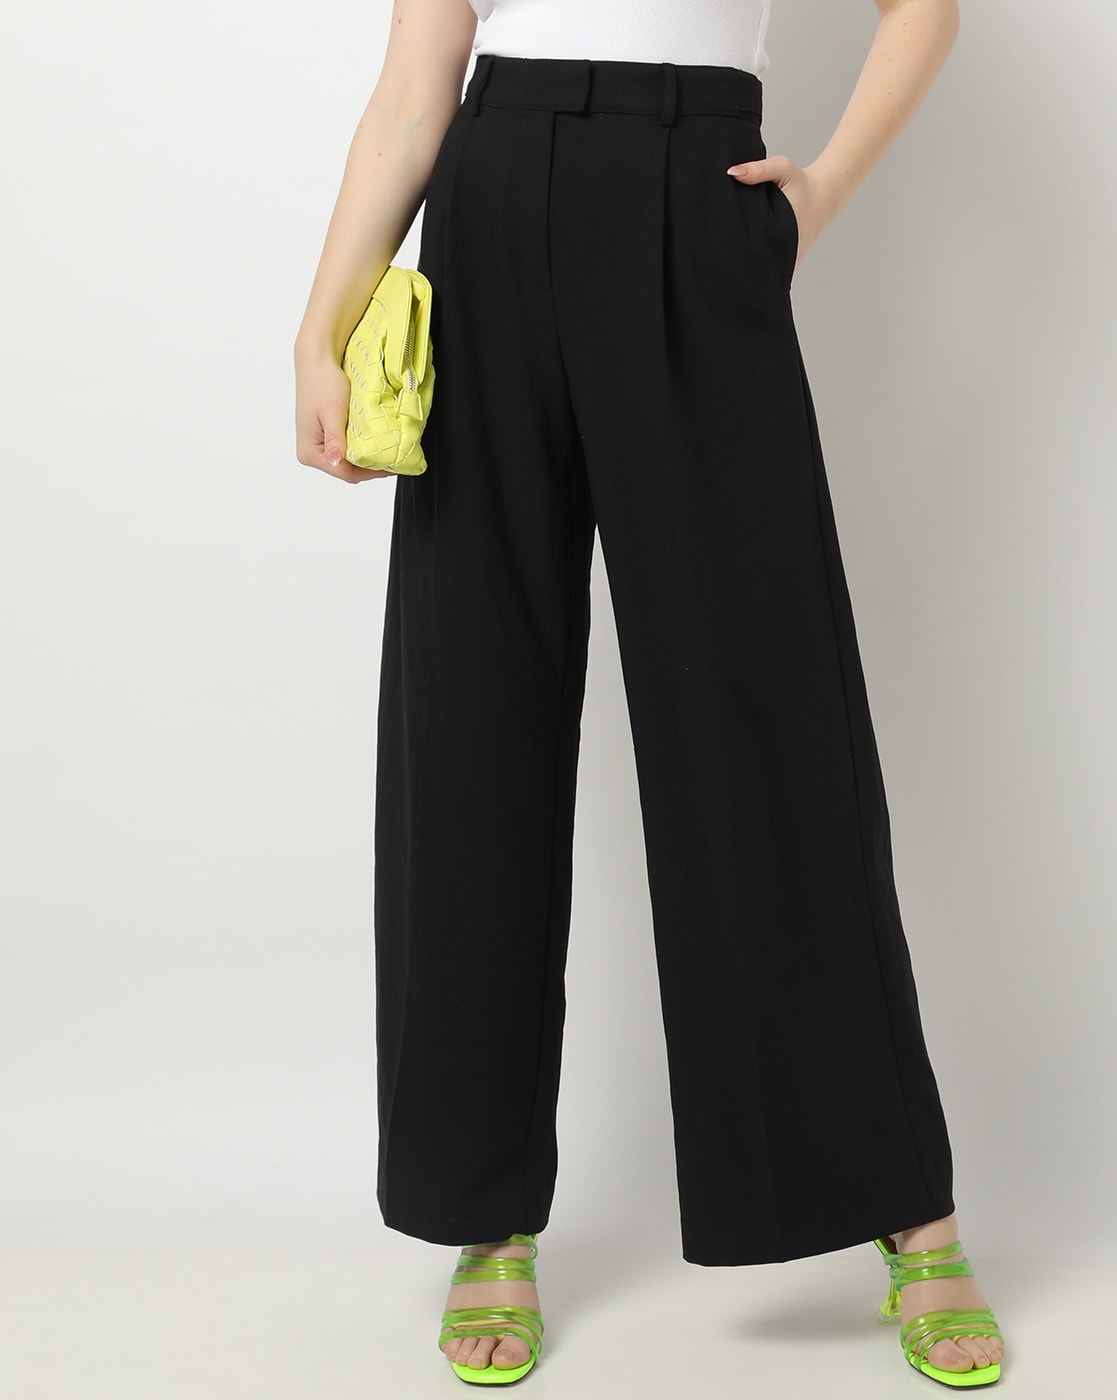 Glide Into Summer With These Wide Leg Palazzo Pants | Us Weekly